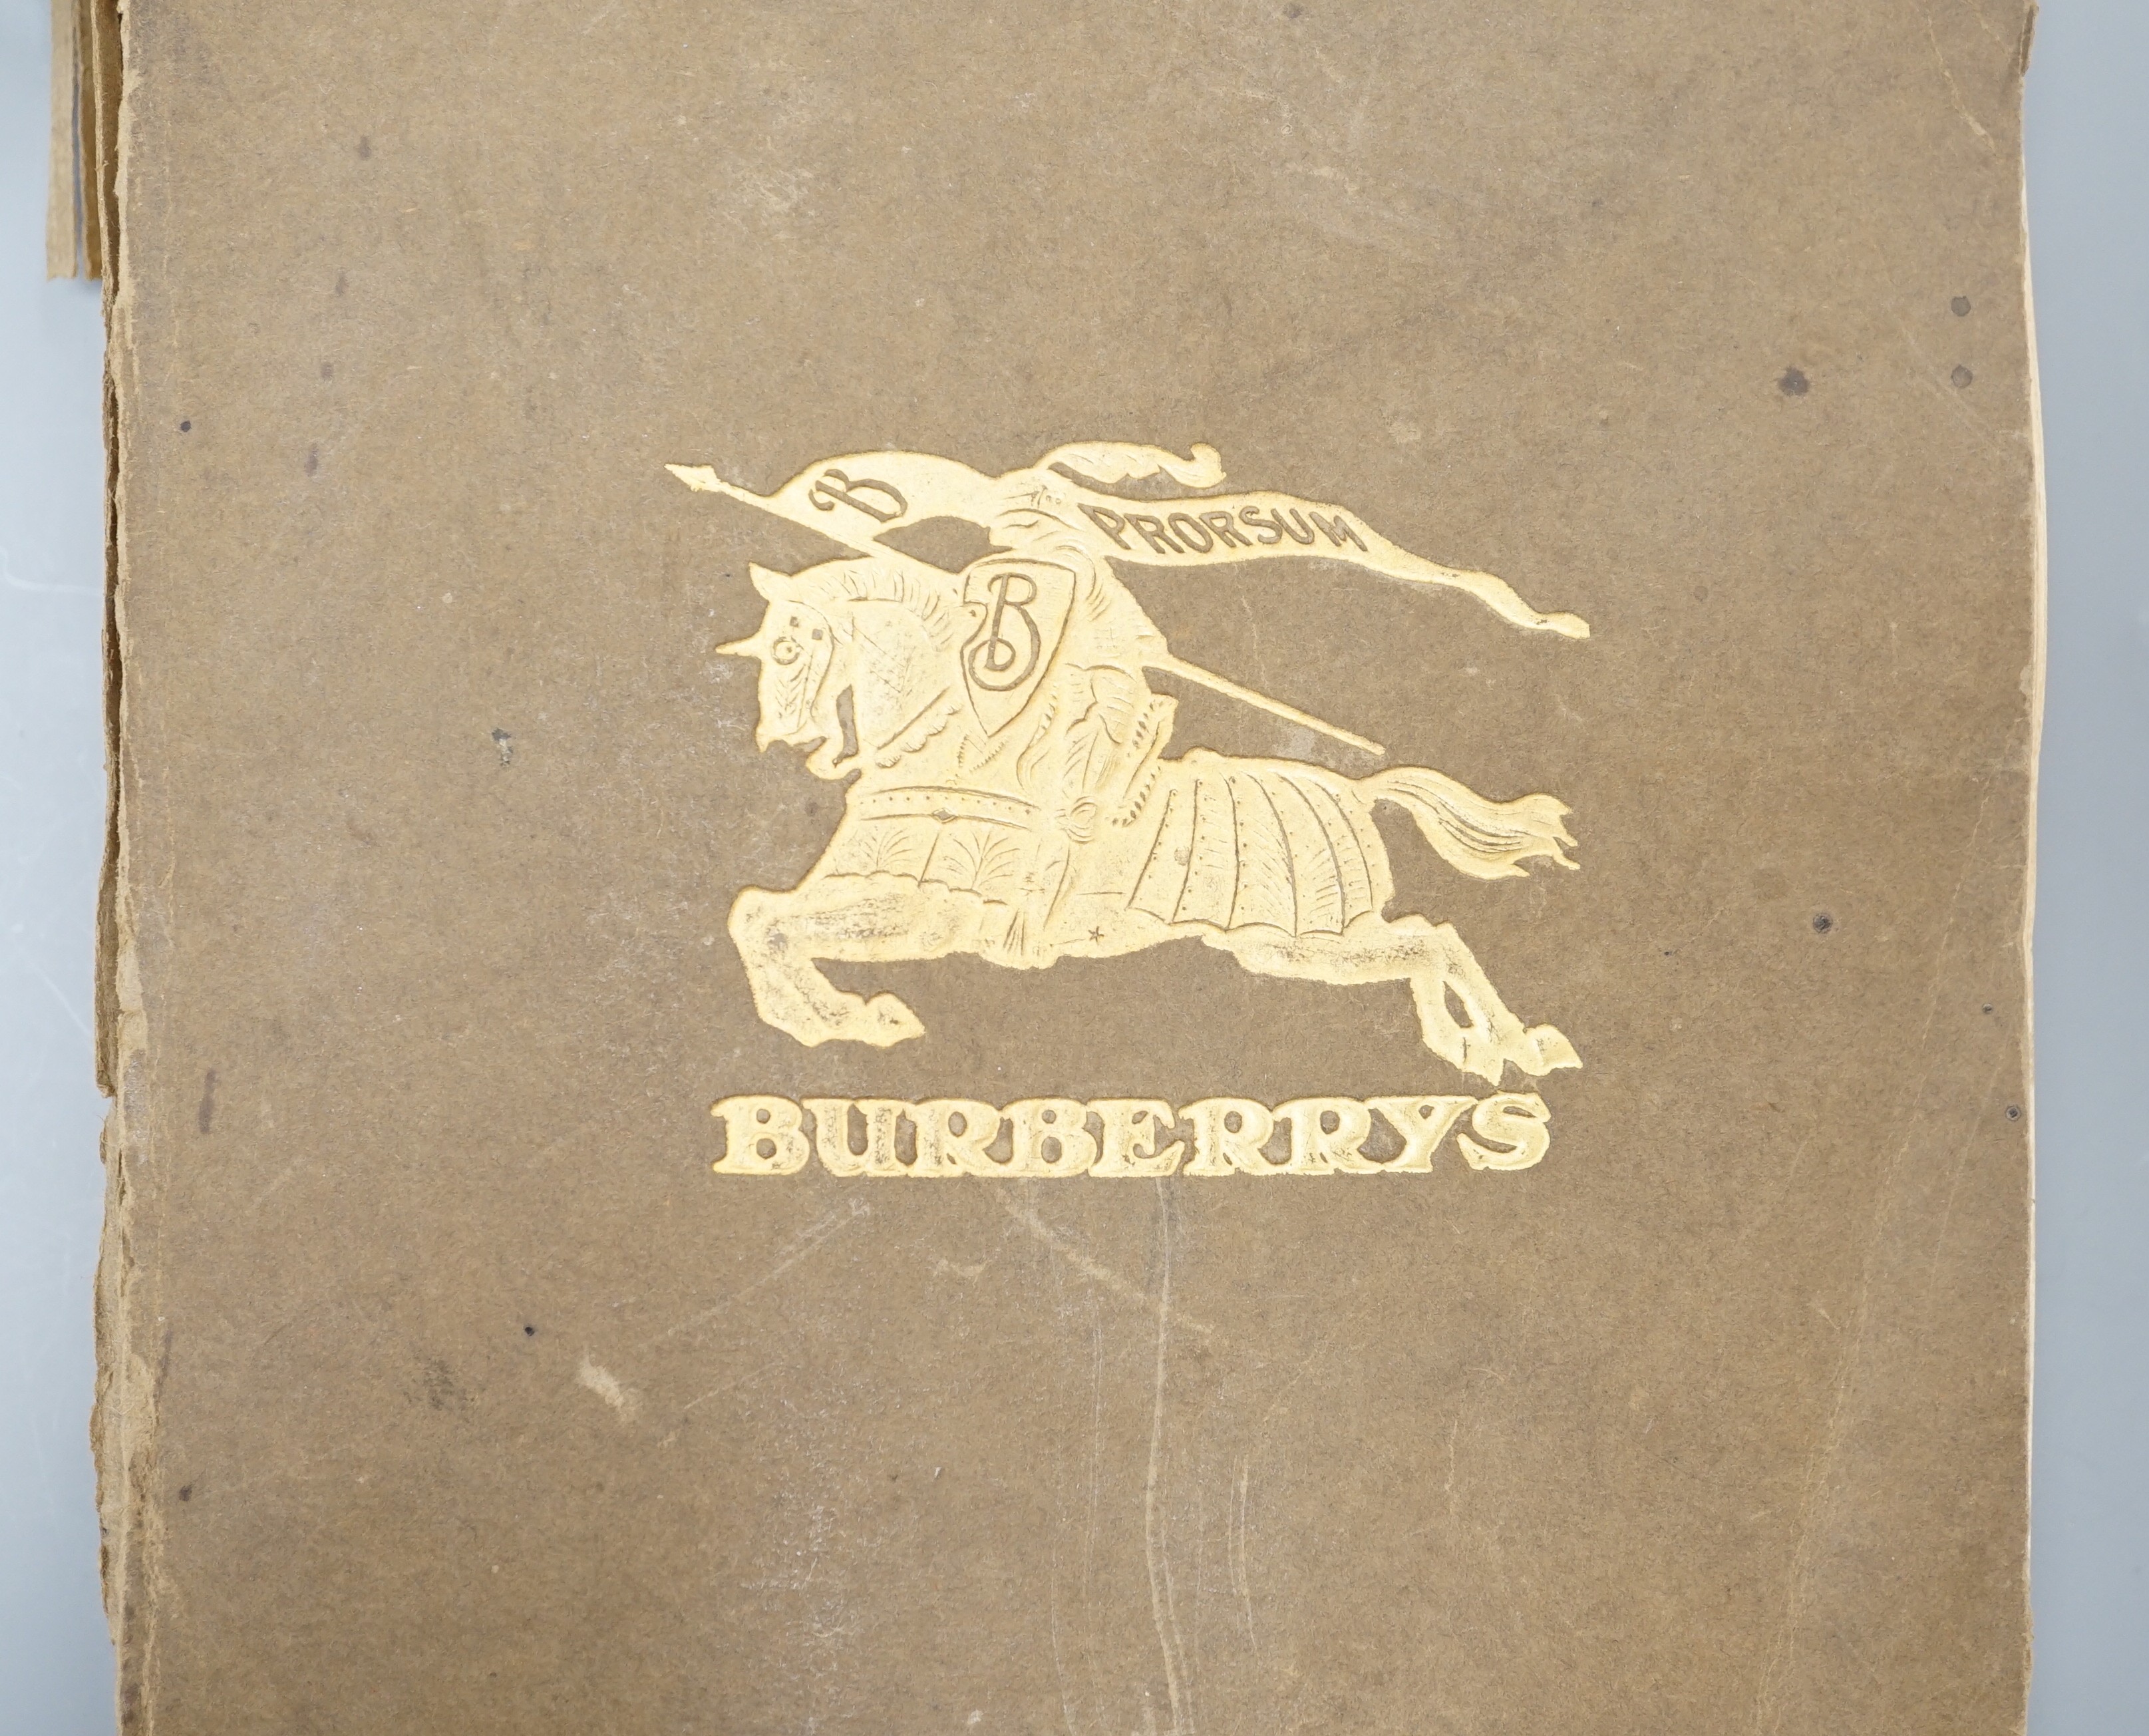 Burberry - Burberry For Men, 19th edition, elongated qto, 256 pages, many mounted with cloth swathes, Burberry gilt coat of arms to front cover, London c.1909